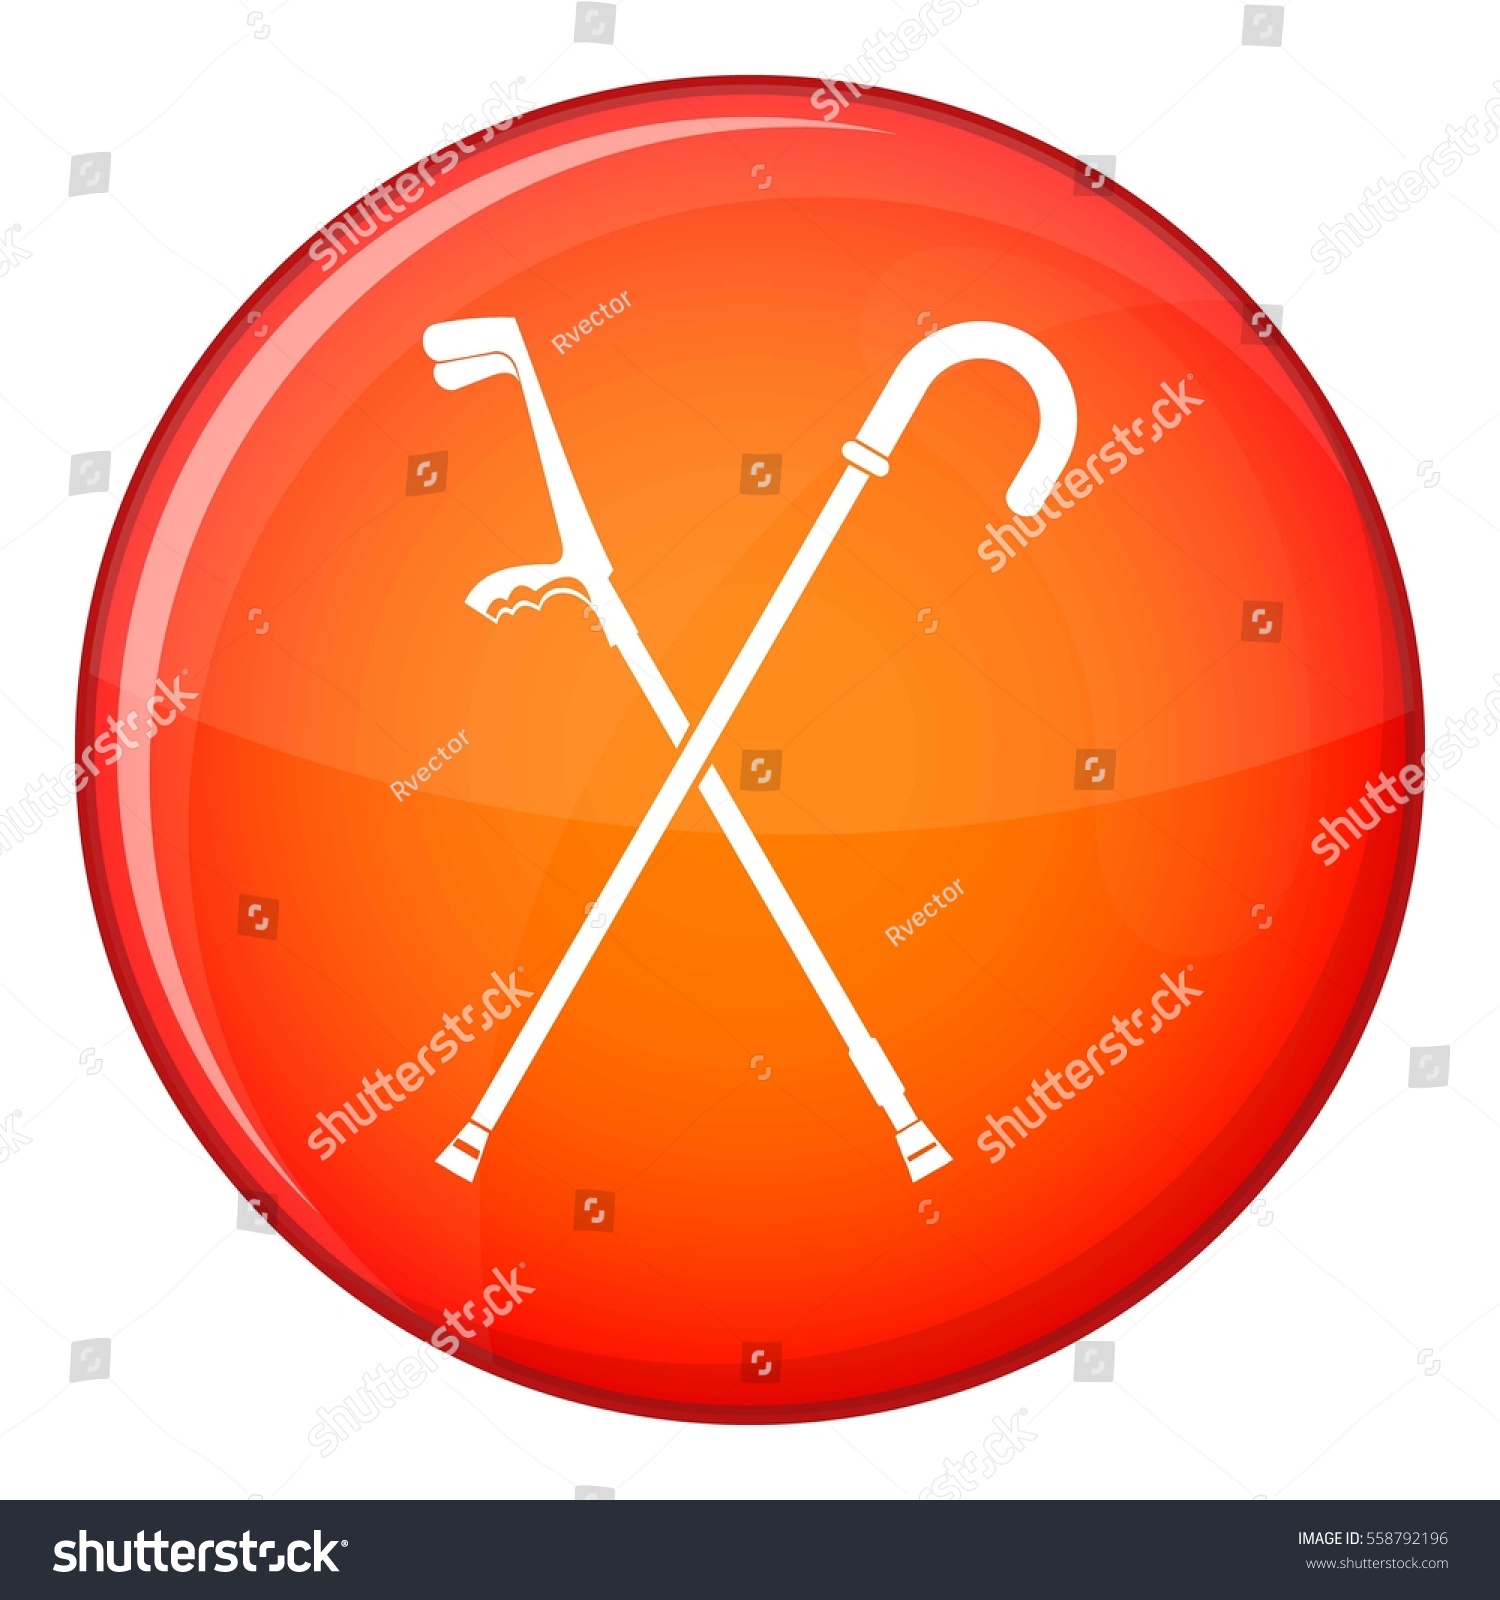 Walking cane icon in red circle isolated on white background  illustration #558792196